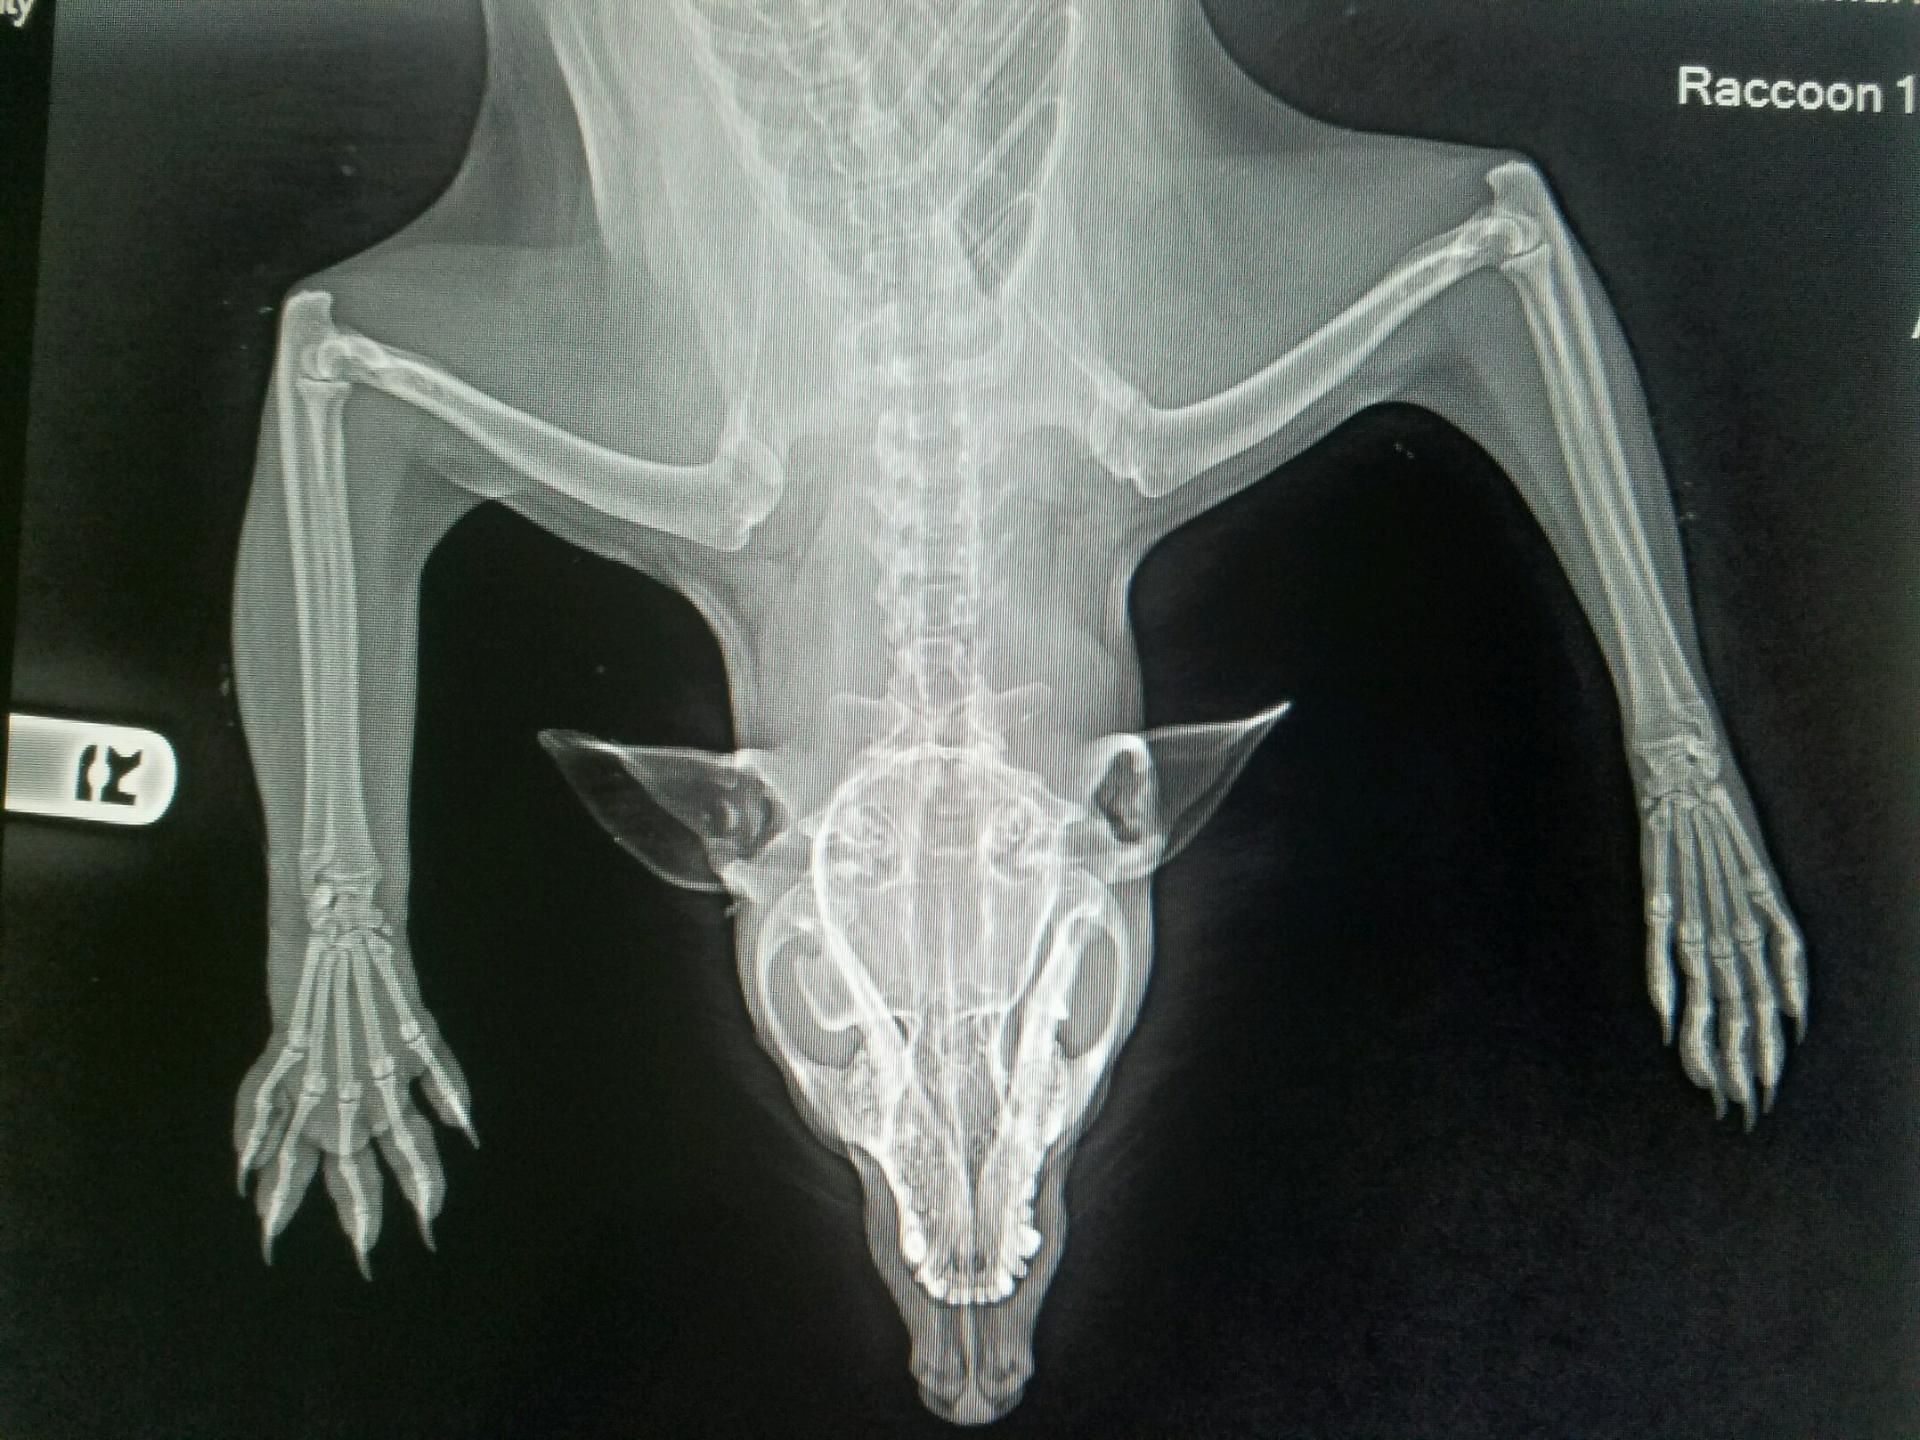 This x-ray shows no breaks, but if you compare the right arm to the left, you can see the swelling throughout the arm.